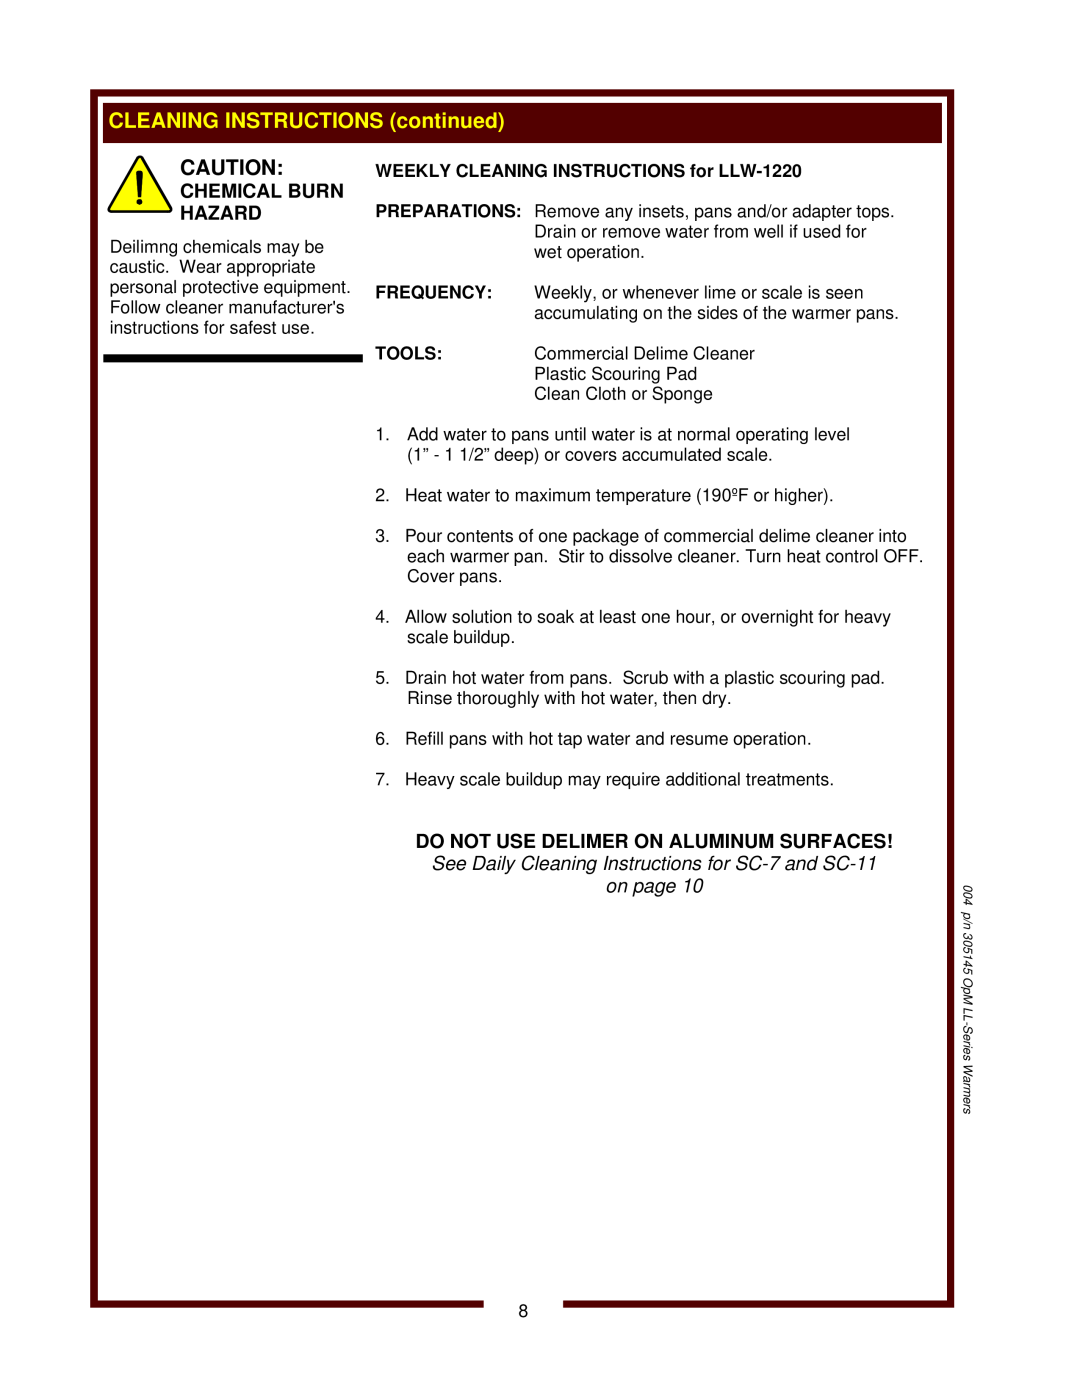 Wells SC-1, SC-7, 6411, LLCH-1220 operation manual Chemical Burn Hazard, WEEKLY CLEANING INSTRUCTIONS for LLW-1220 